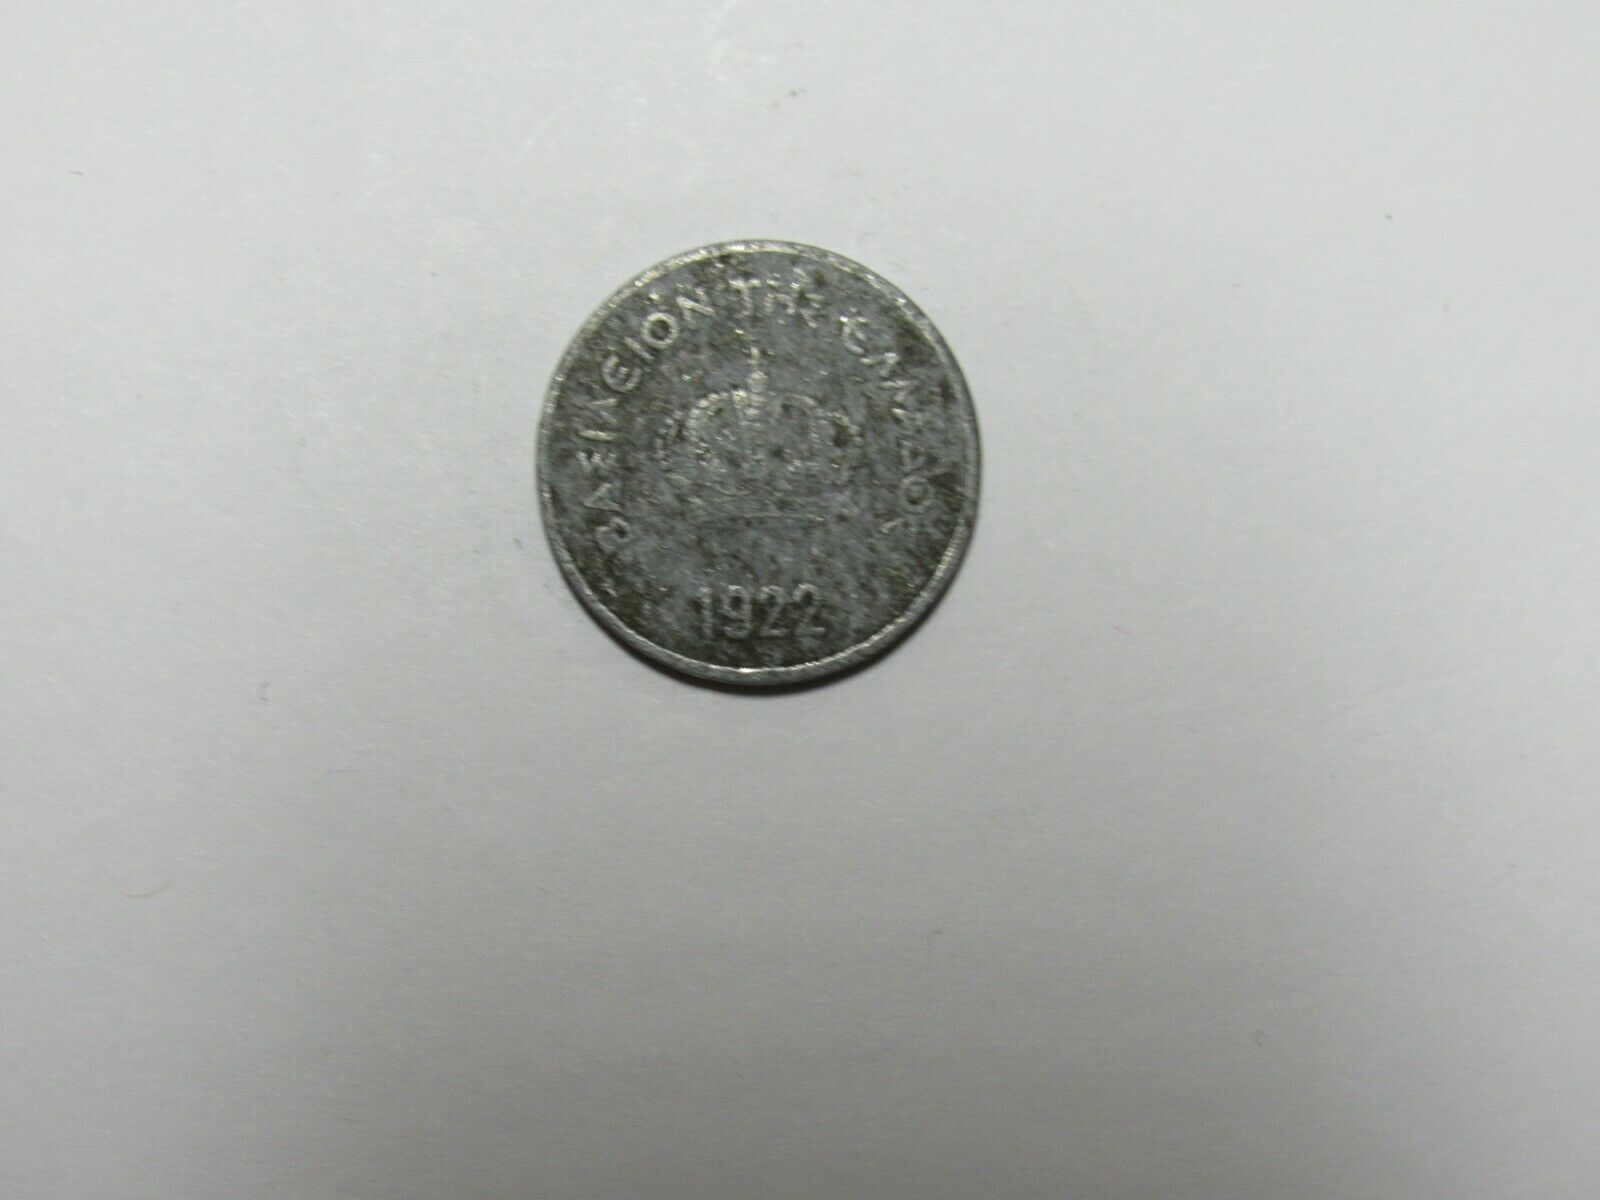 Old Greece Coin - 1922 10 Lepta - Circulated, Corroded